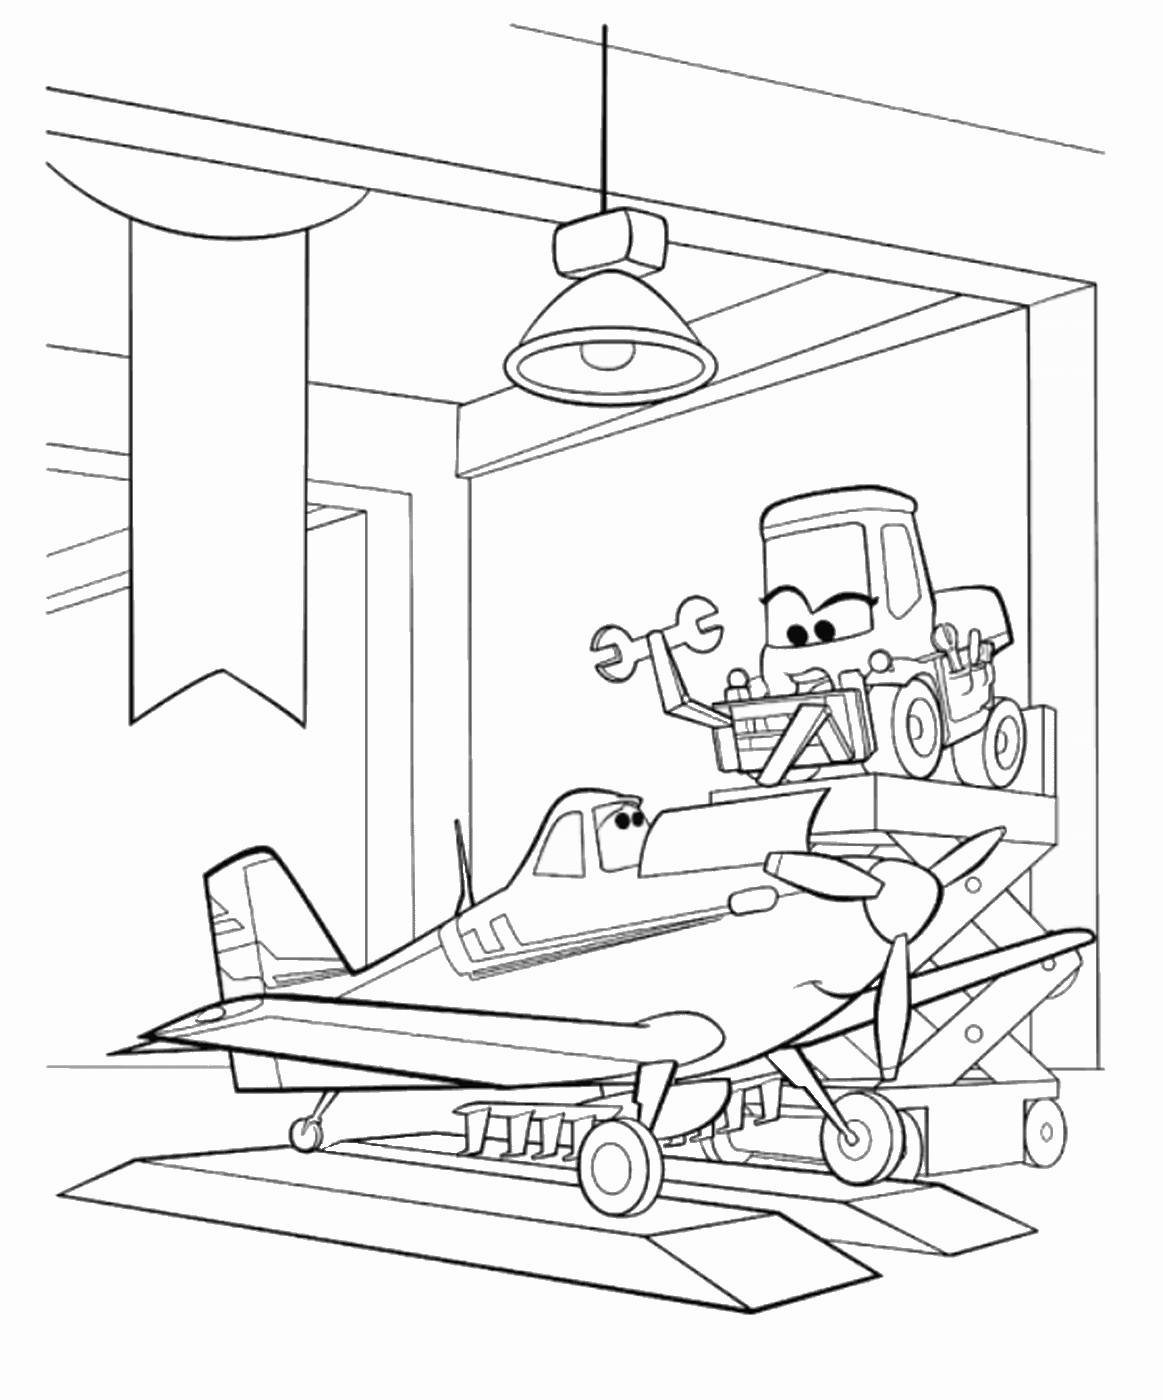 Download Coloring Page Planes Images